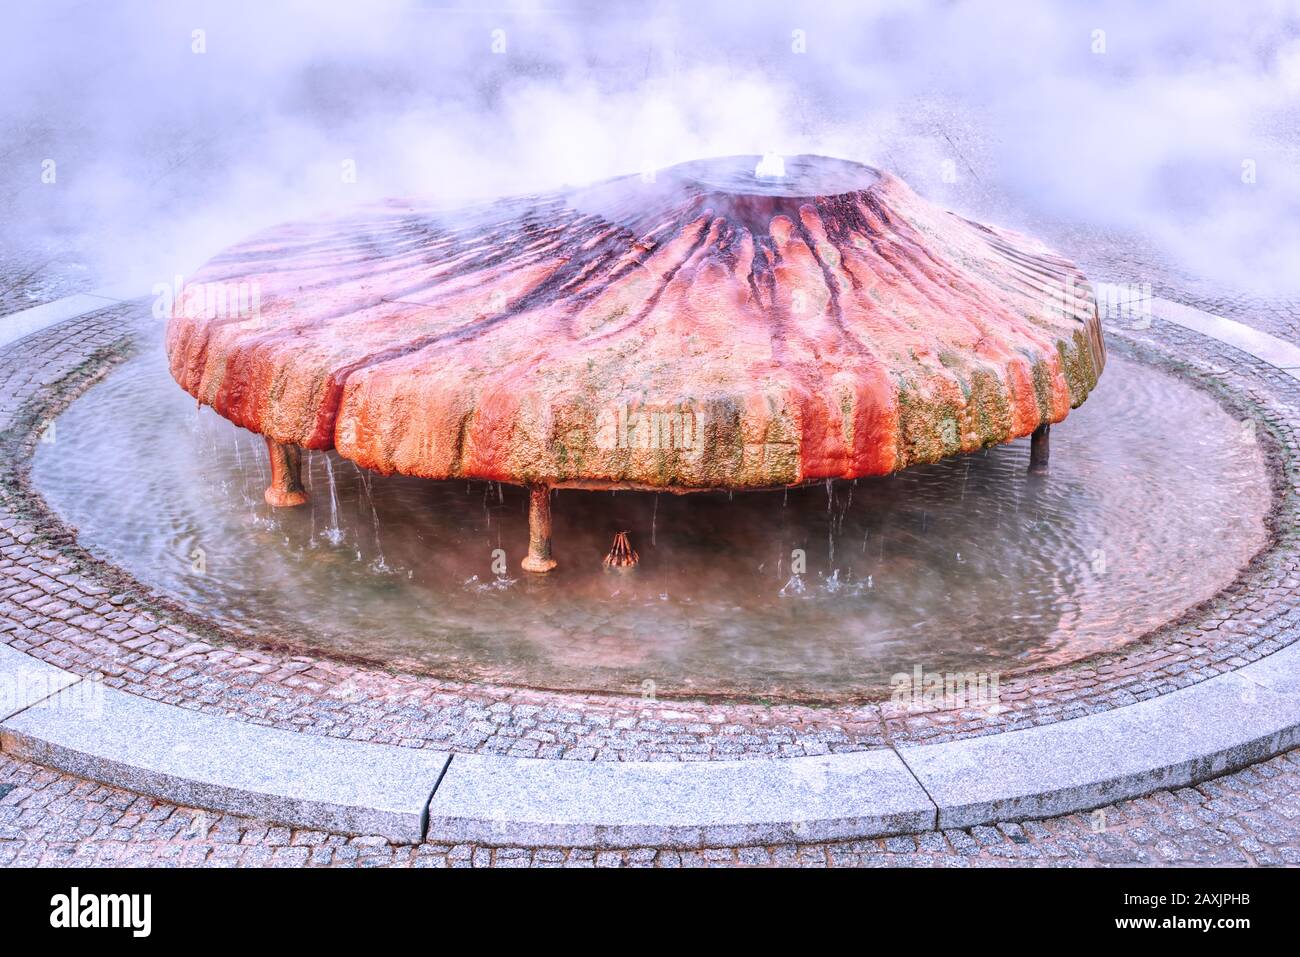 Kochbrunnen, boil fountain, in Wiesbaden, Hesse, Germany. Famous sodium chloride hot spring in the city. Stock Photo